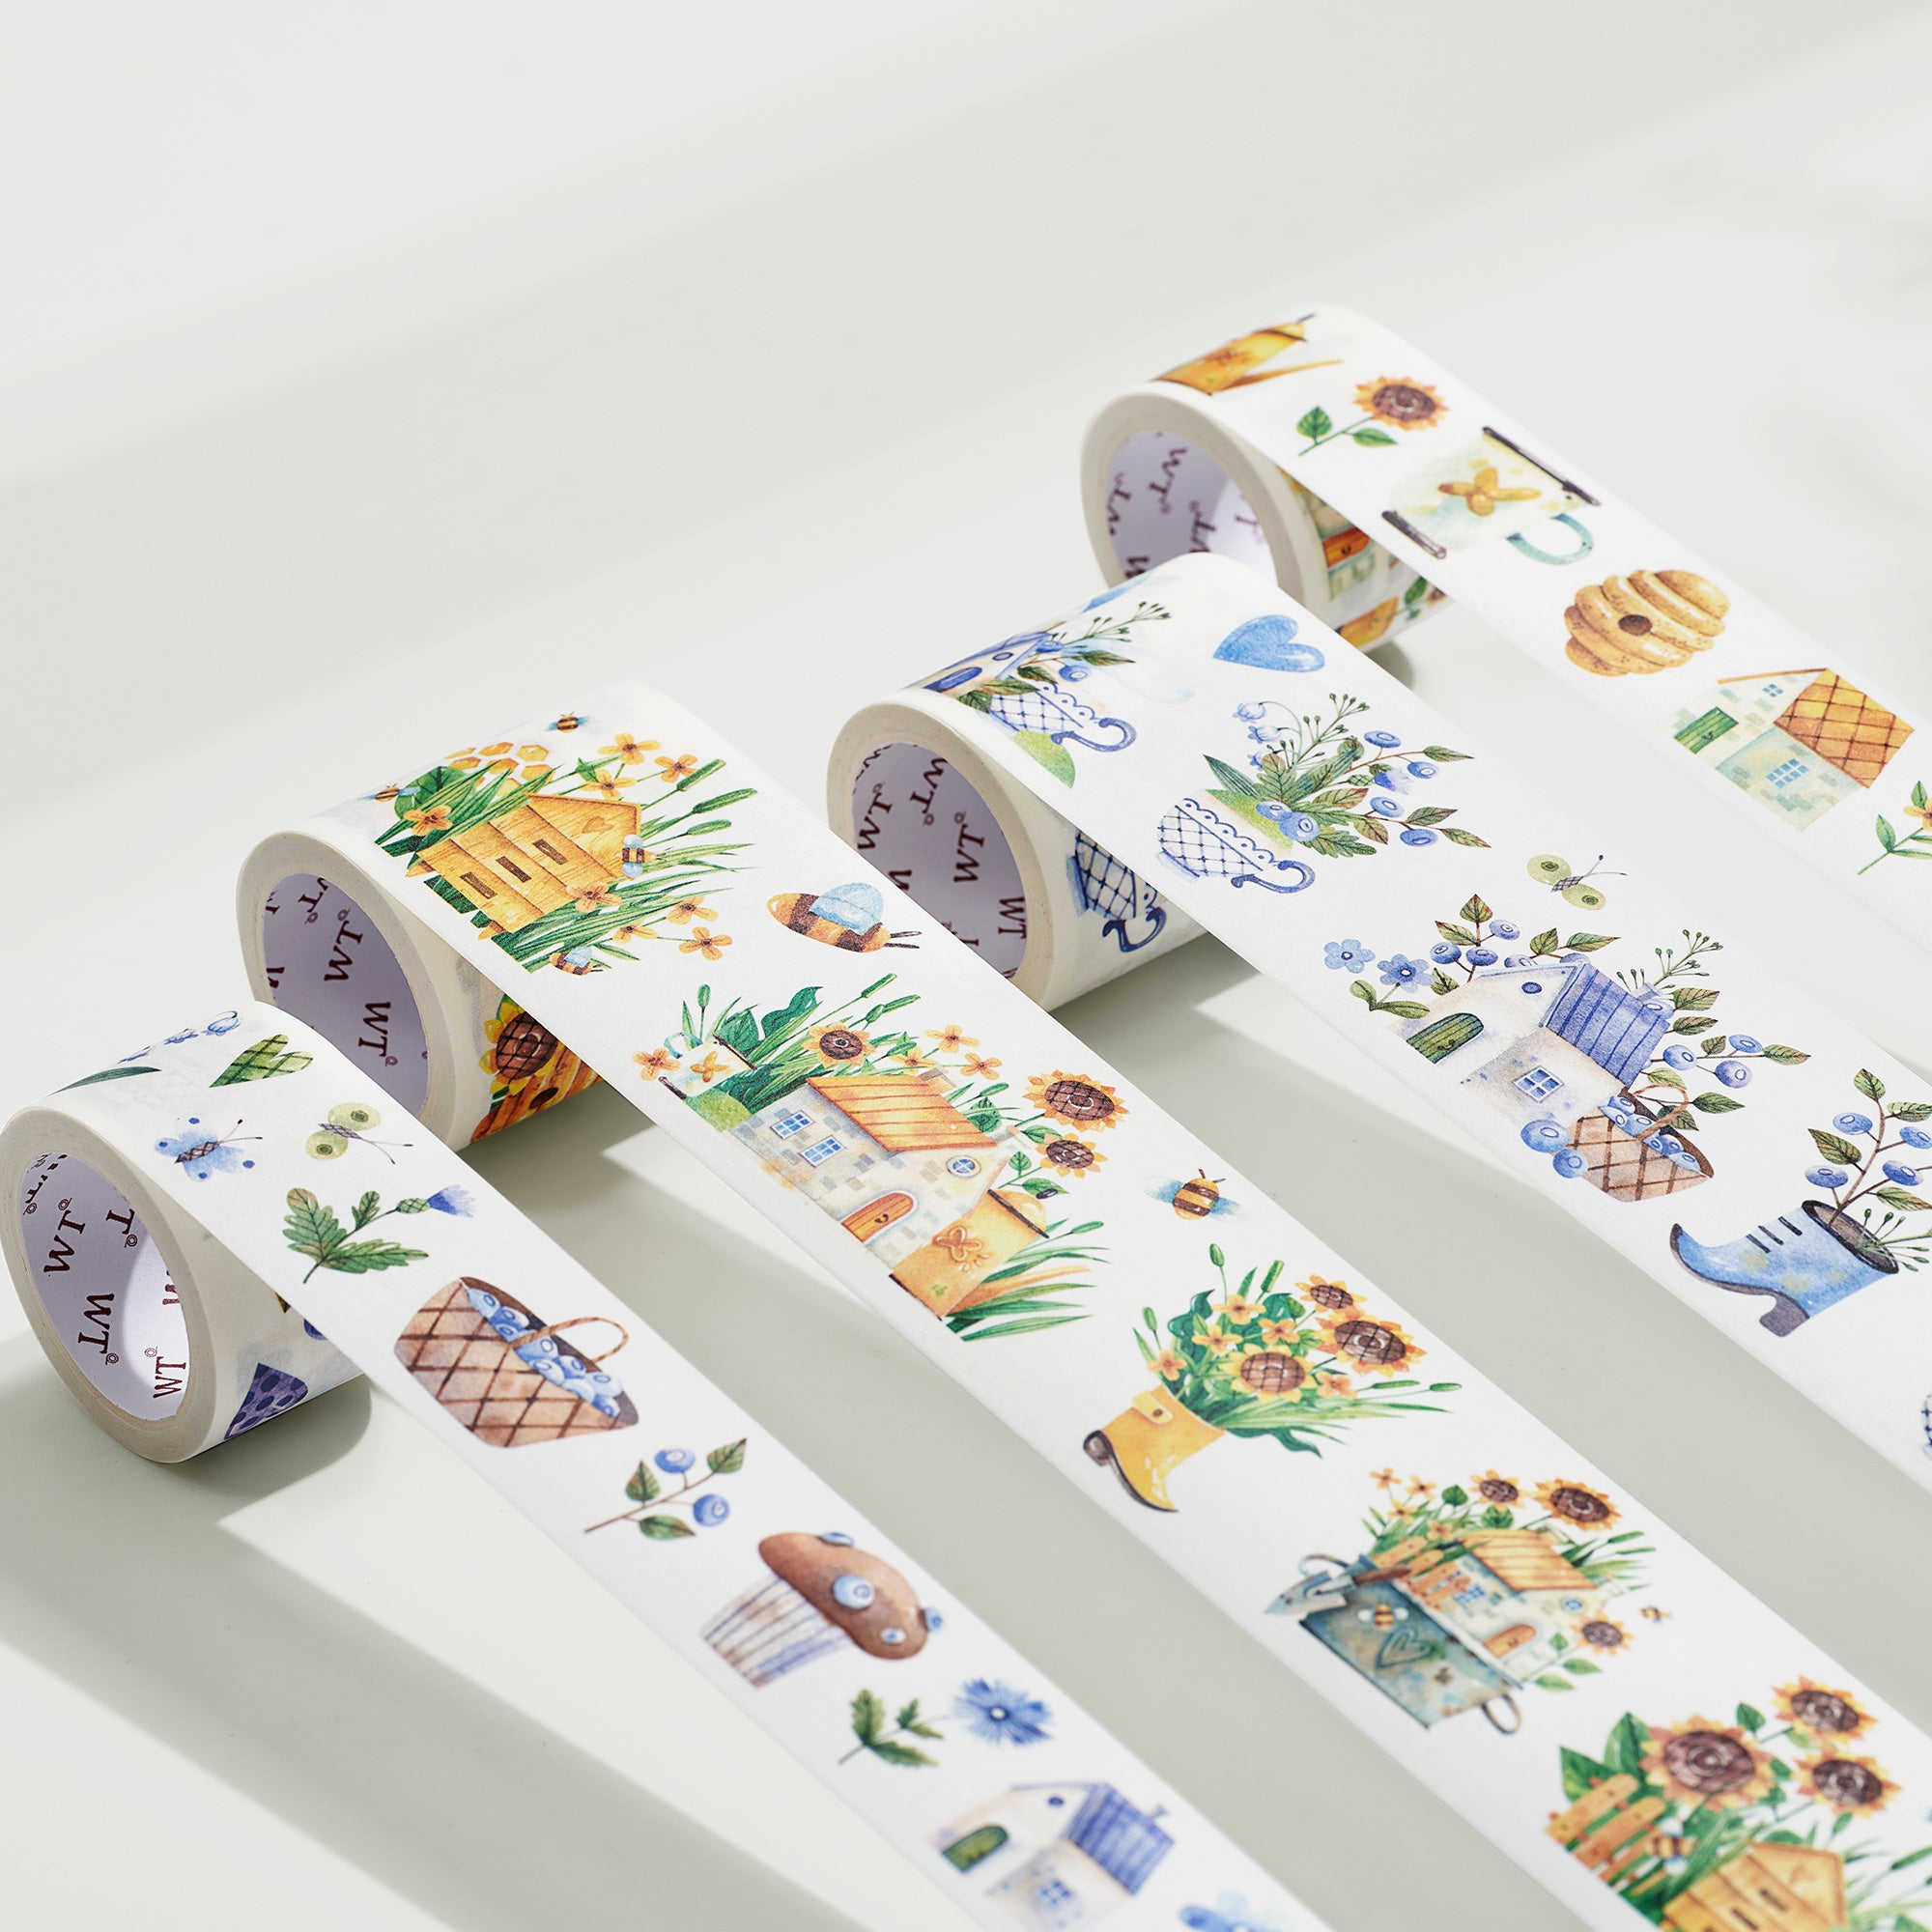 Misty Haven Washi Tape Sticker Set | The Washi Tape Shop. Beautiful Washi and Decorative Tape For Bullet Journals, Gift Wrapping, Planner Decoration and DIY Projects